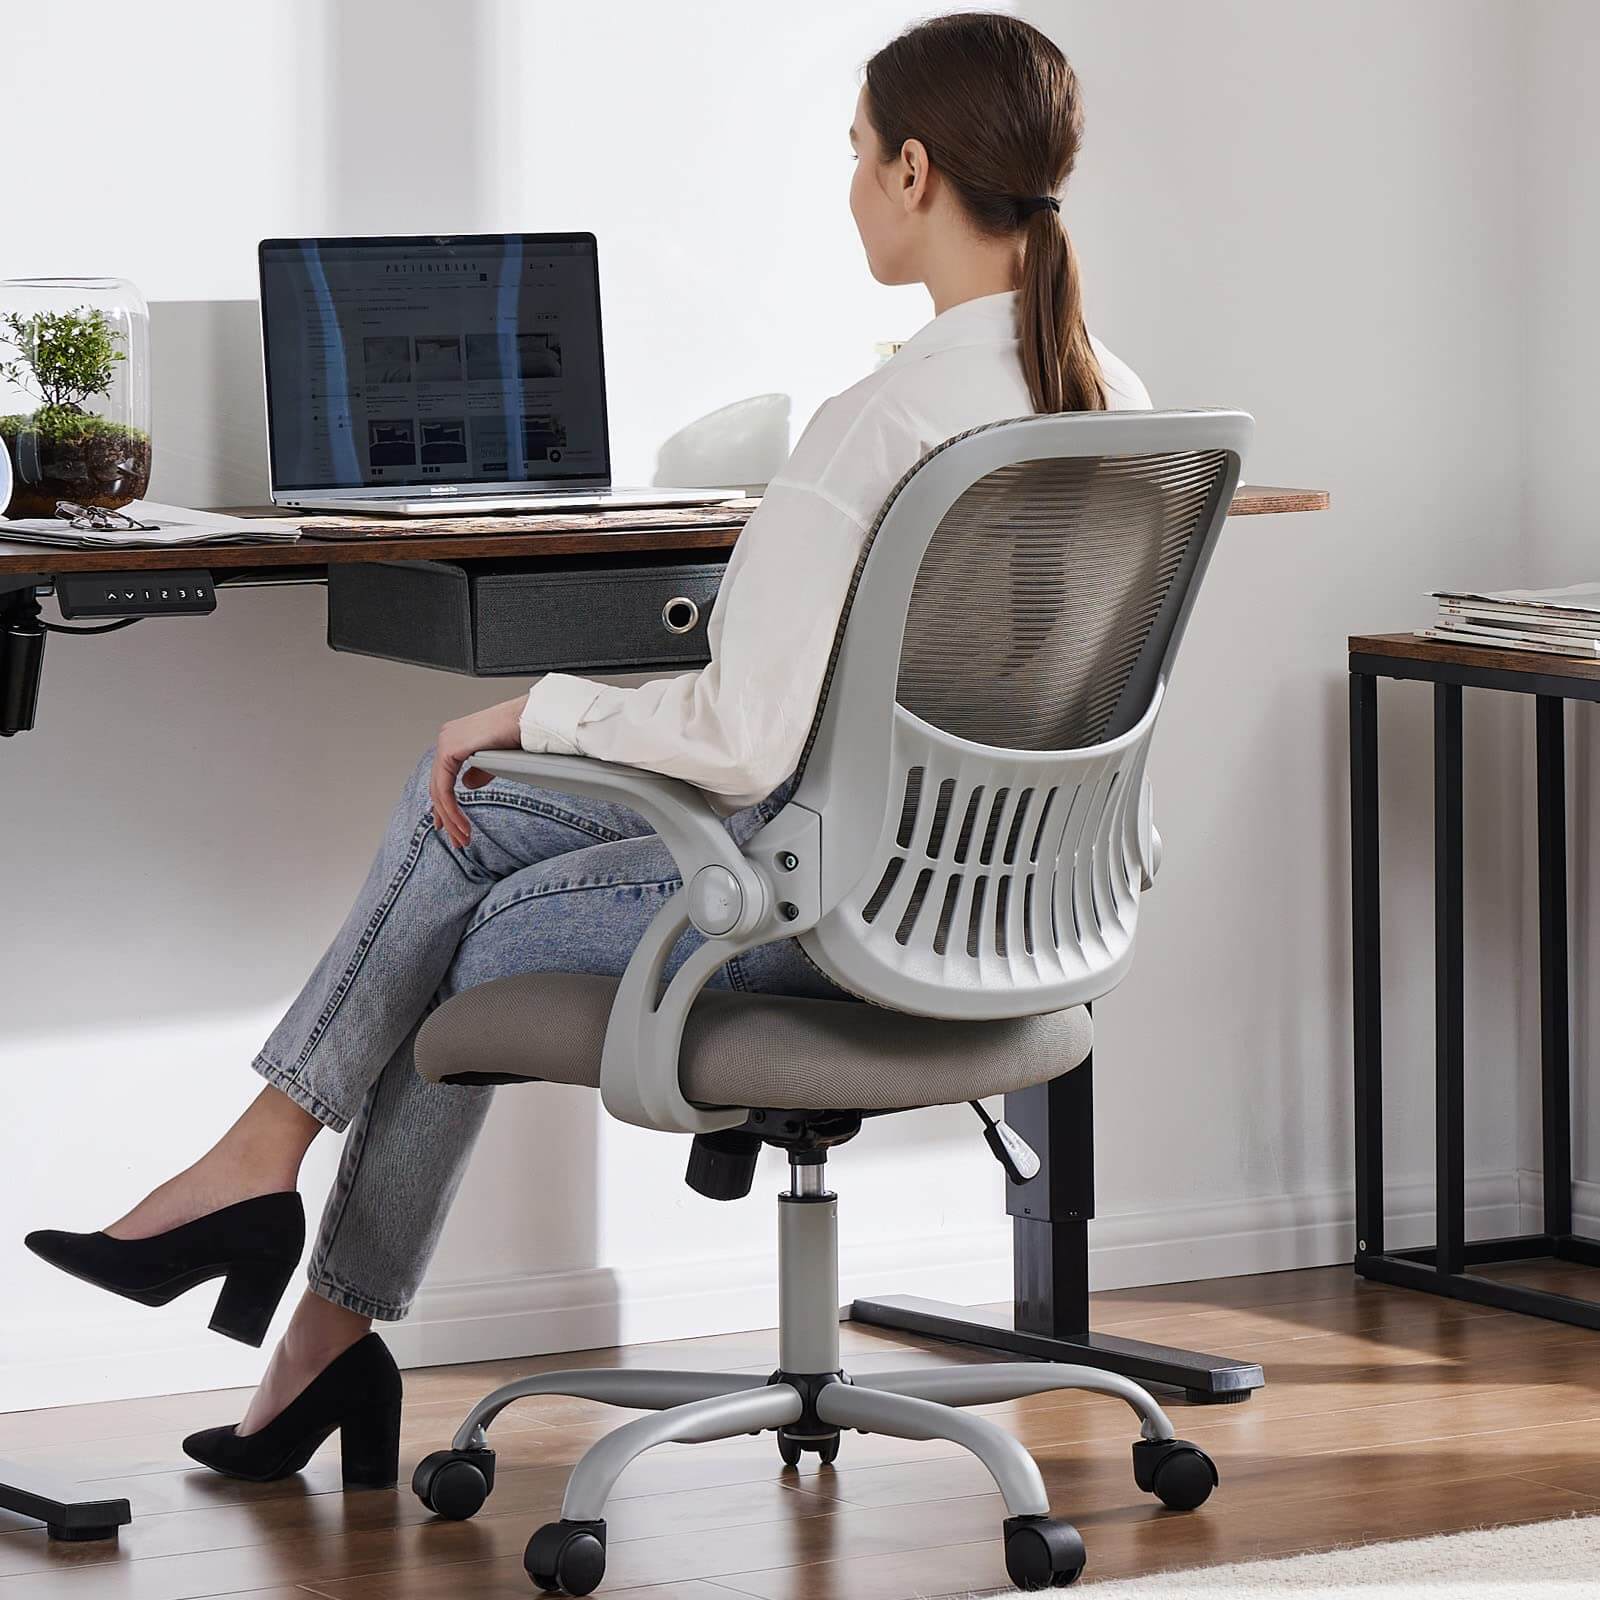 mesh-office-chairs#Color_Gray#Quantity_1 Chair